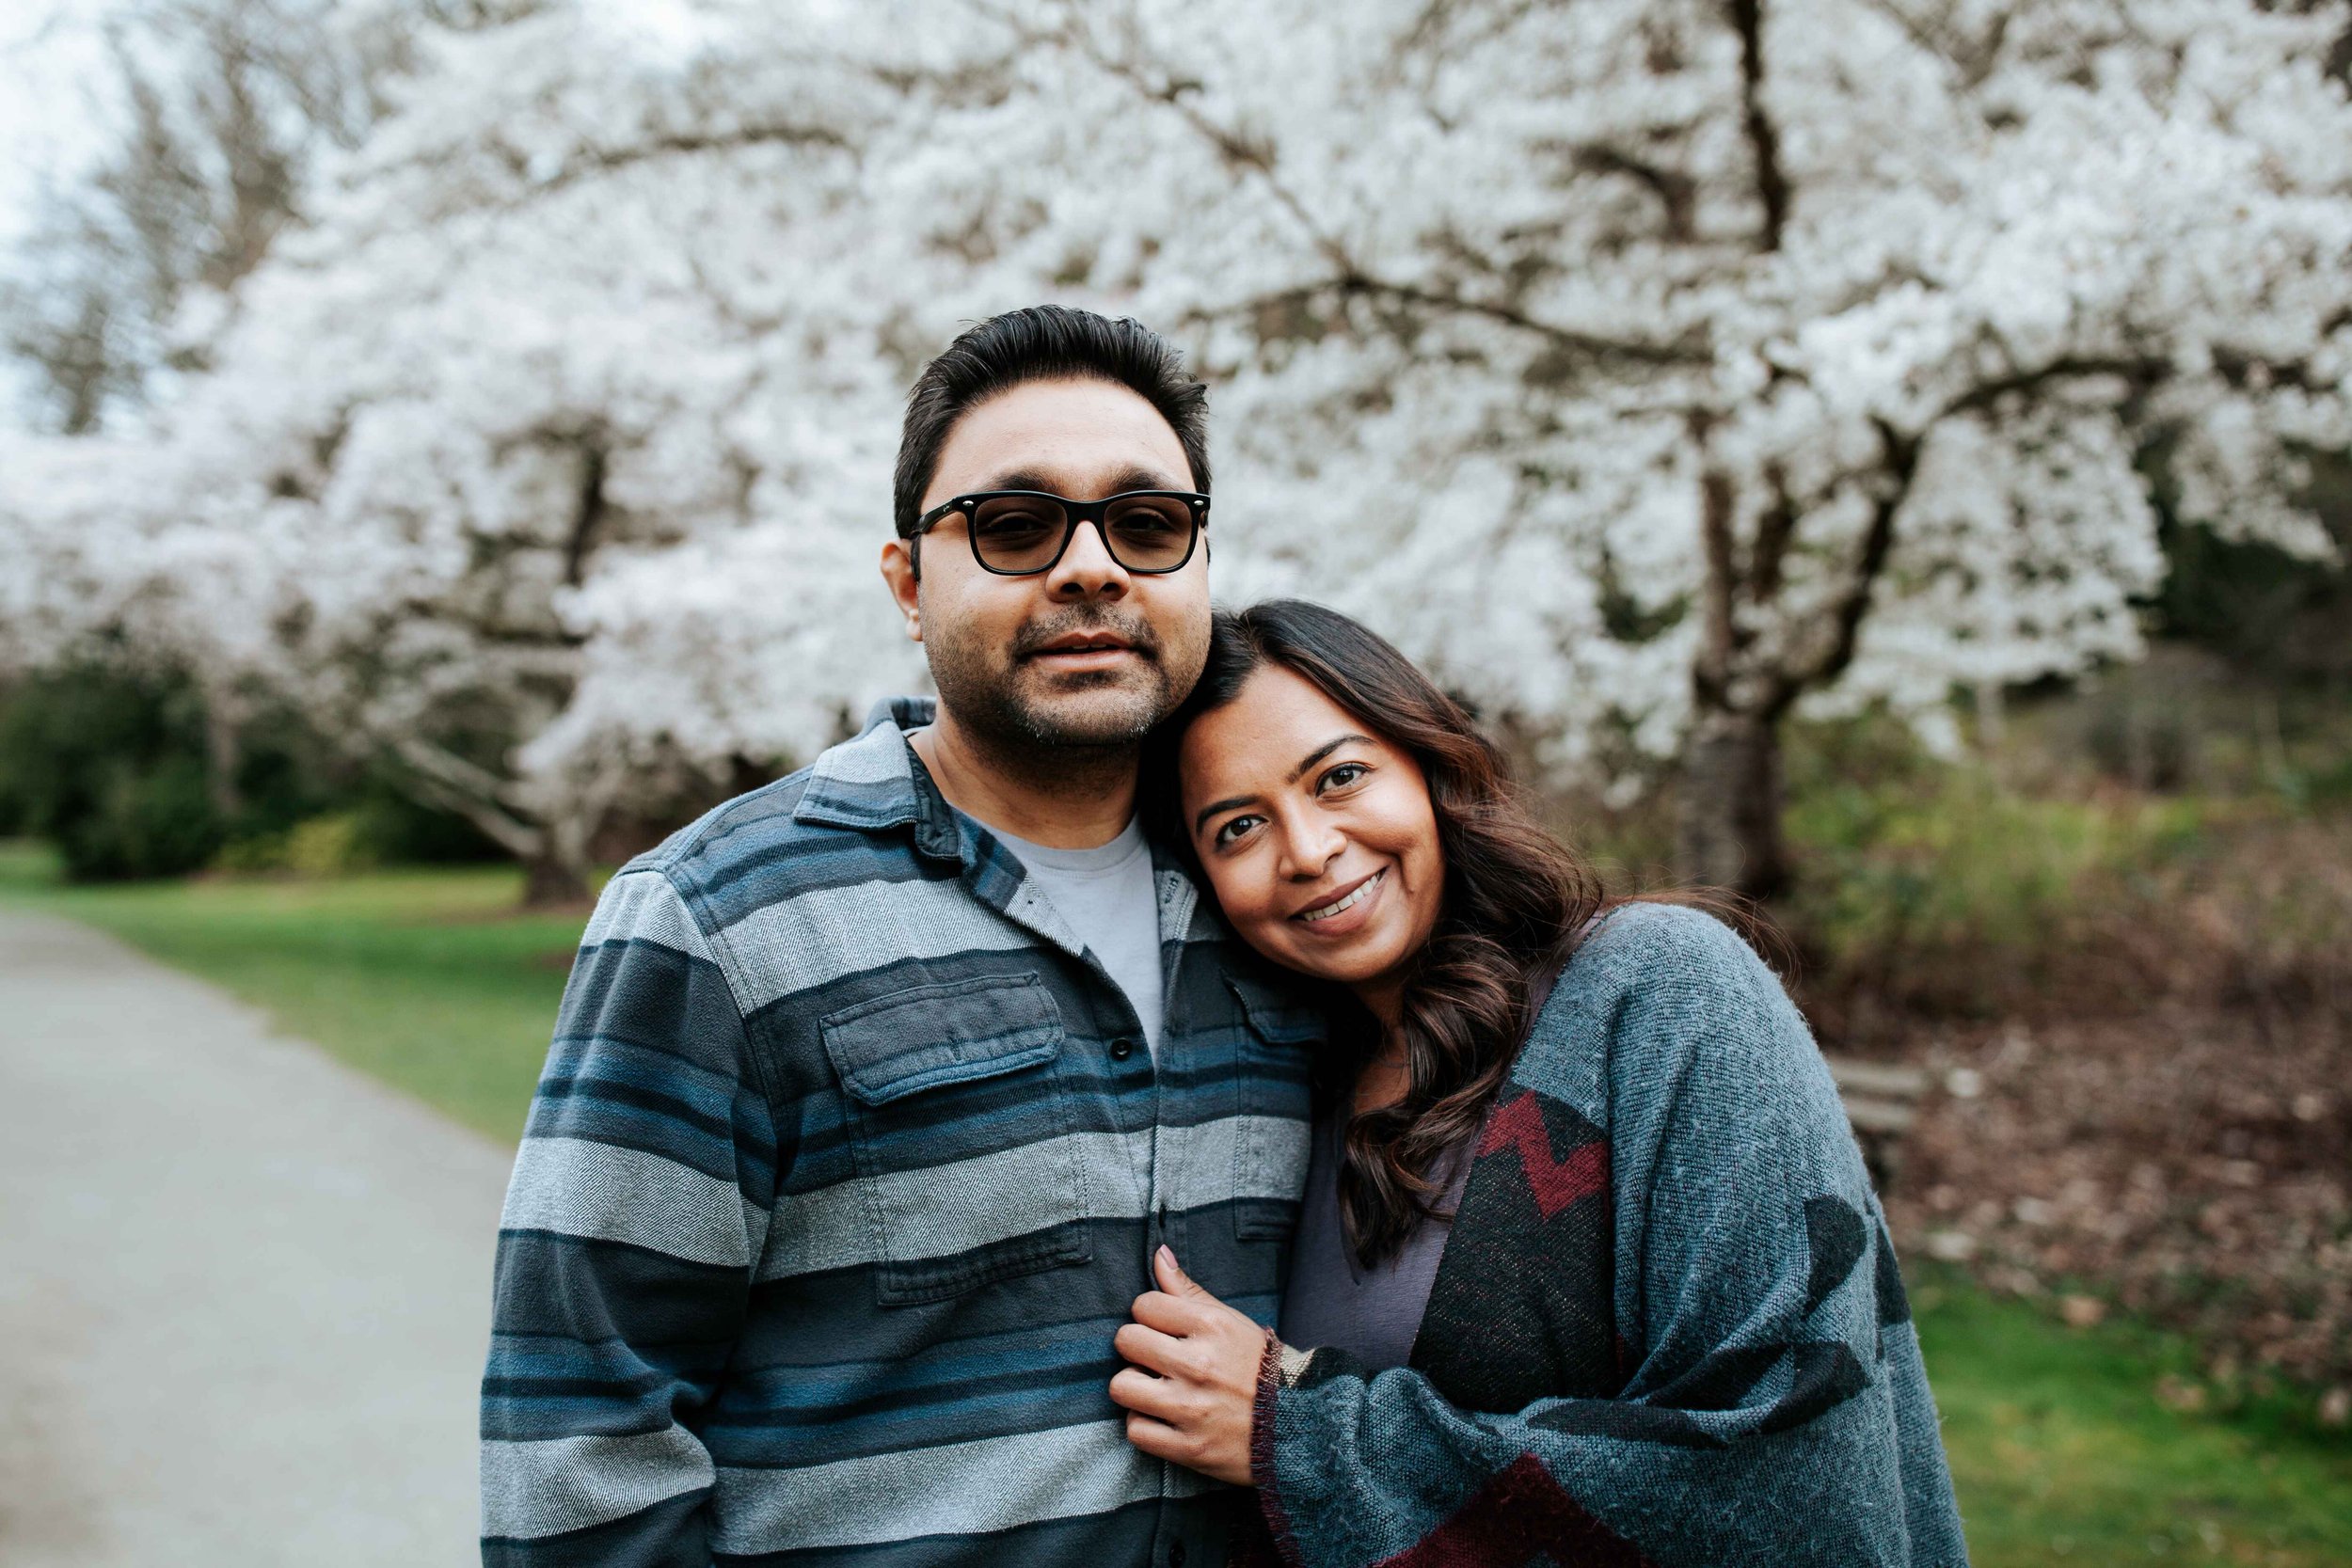 seattle lifestyle photographer - spring mini sessions